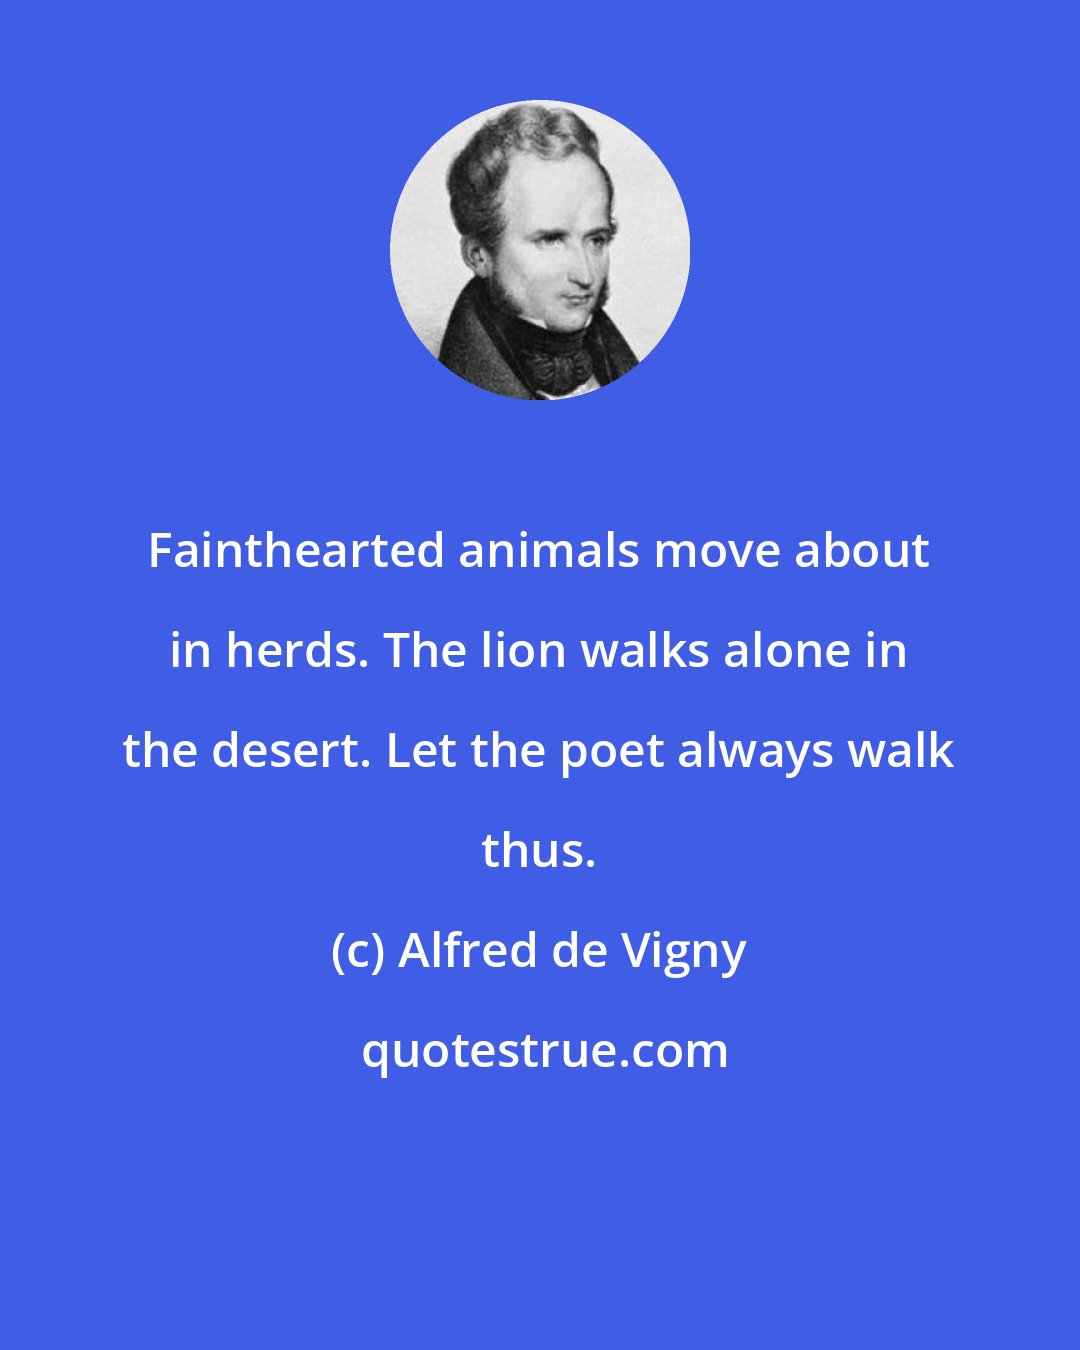 Alfred de Vigny: Fainthearted animals move about in herds. The lion walks alone in the desert. Let the poet always walk thus.